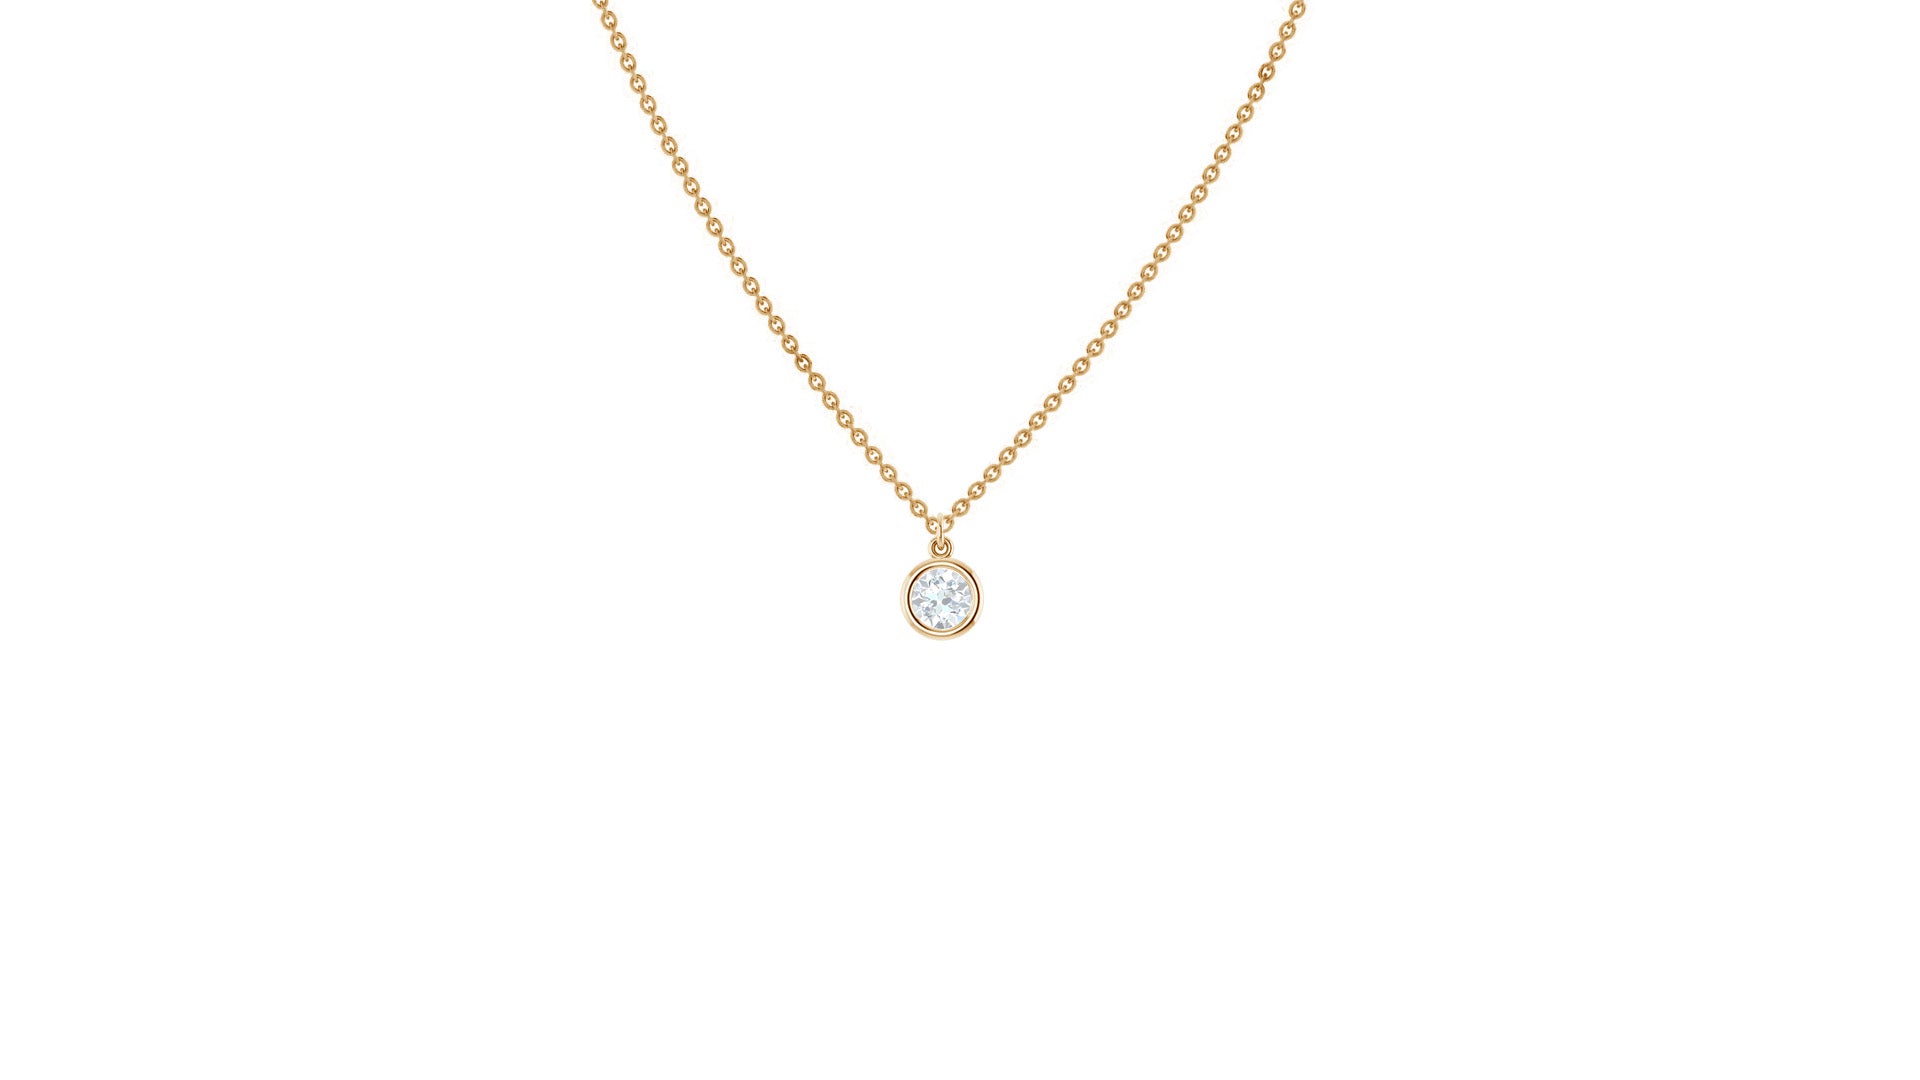 April Diamond Birthstone Necklace in 14kt Yellow Gold